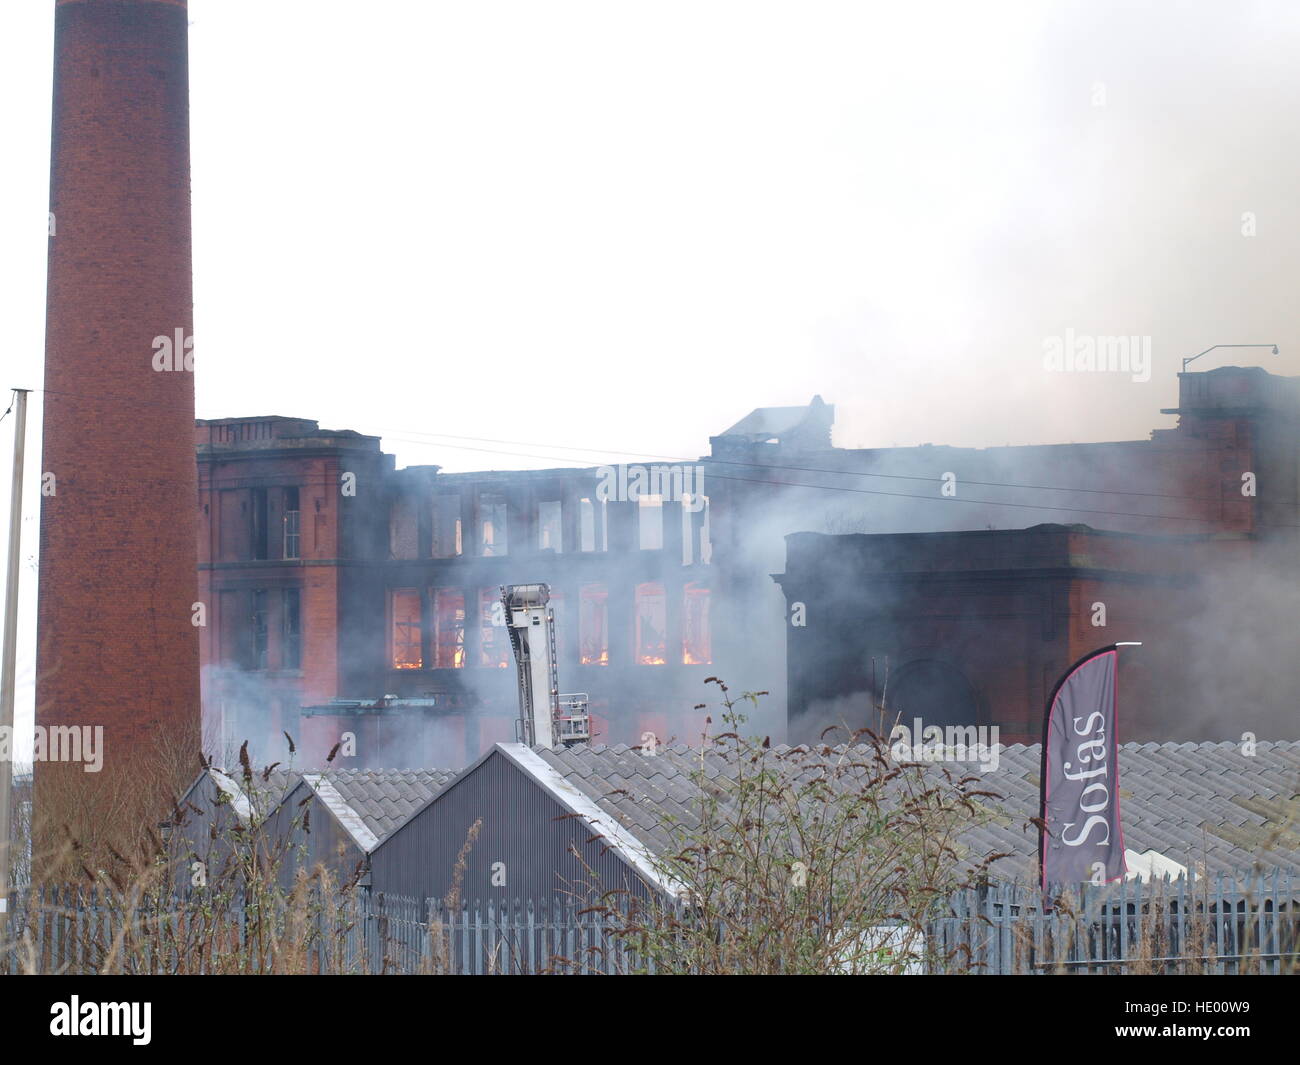 Oldham, UK. 15th Dec, 2016. Emergency services have evacuated more than 100 nearby properties after a large blaze broke out at a paper mill site in Greater Manchester. More than 70 firefighters and 15 fire engines from Greater Manchester Fire and Rescue Service are tackling the fire at the building on Cardwell Street in Oldham, north-east of Manchester, on Thursday morning. © M Kyle/Alamy Live News Stock Photo